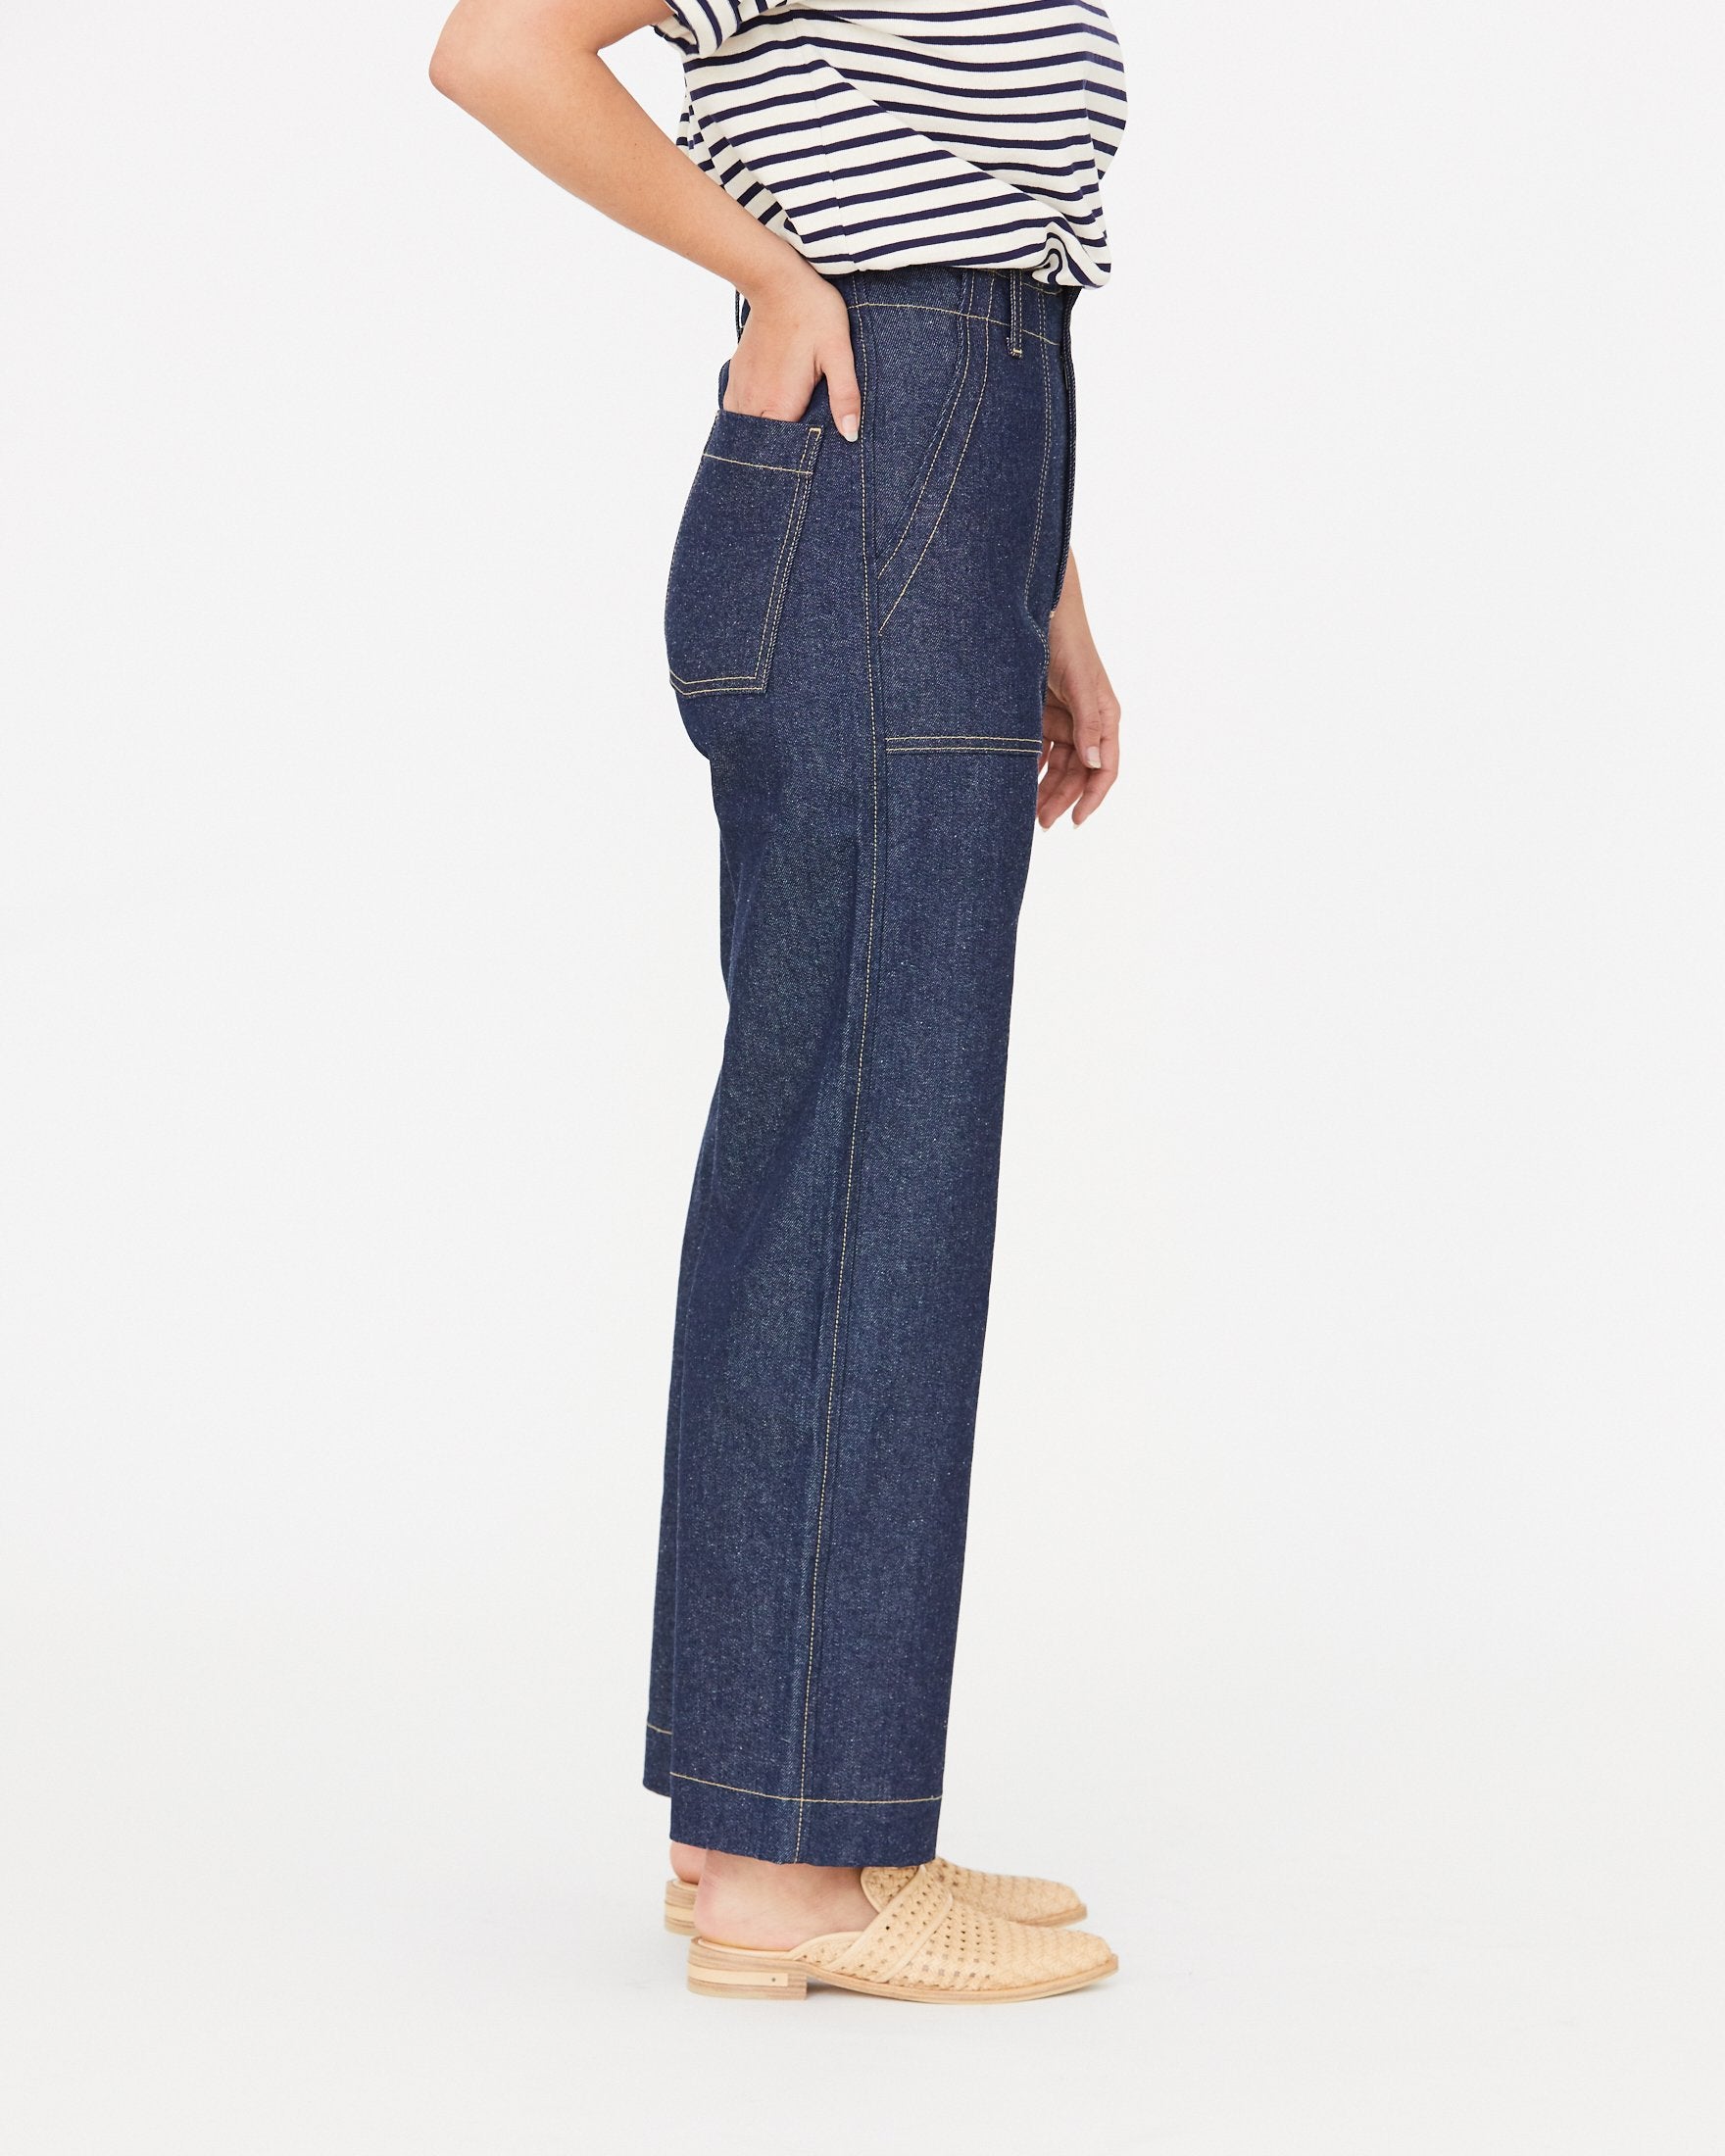 FINCH JEAN - UNWASHED - 4